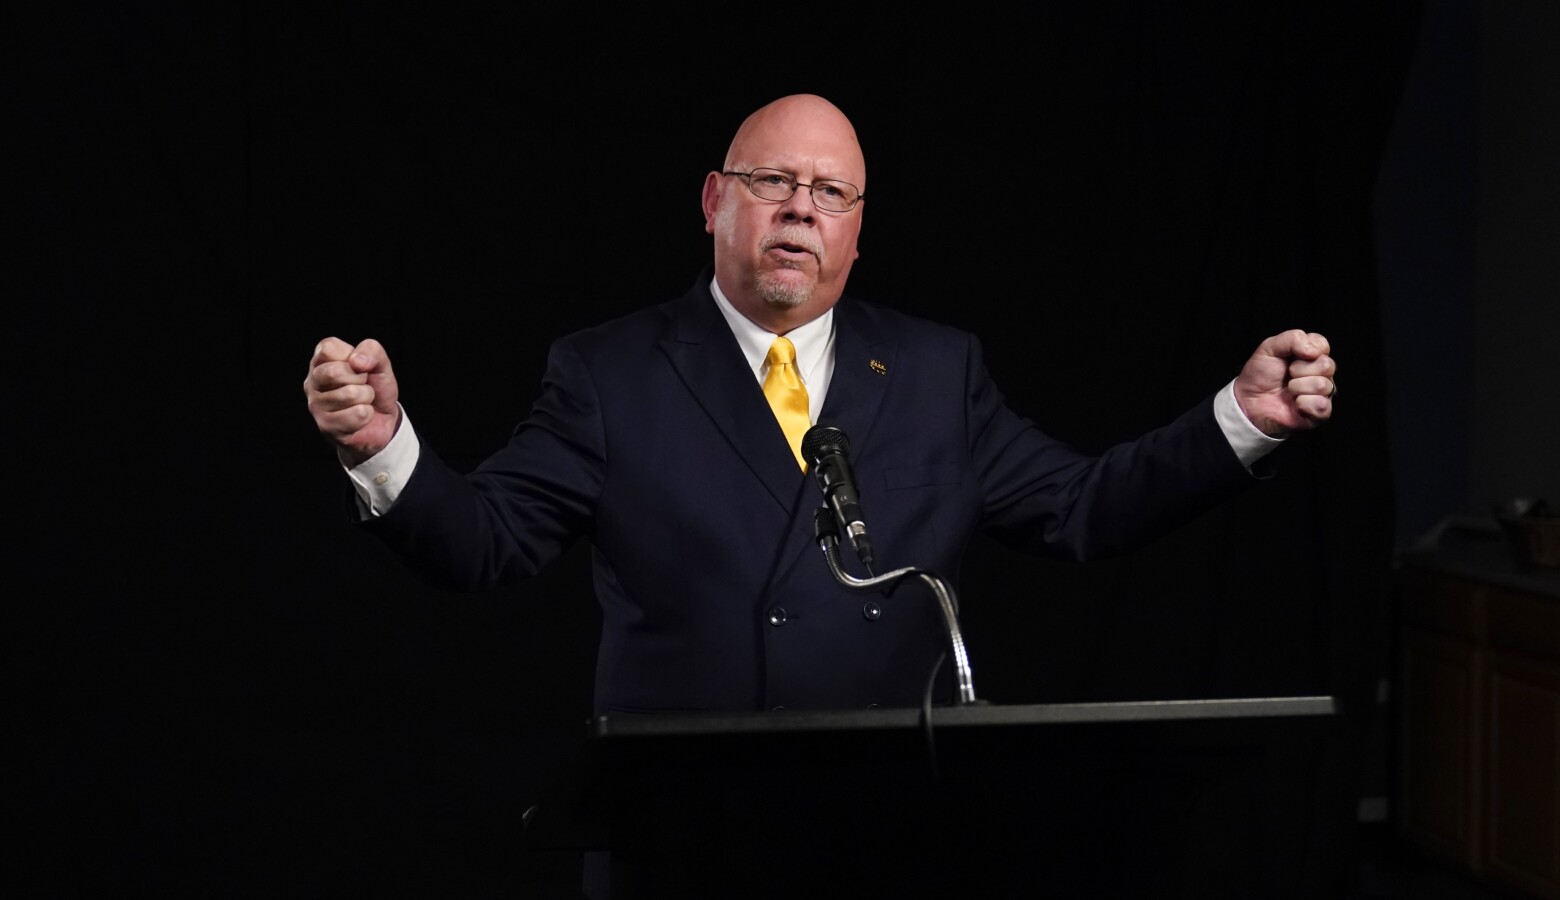 Libertarian candidate Donald Rainwater (pictured) was particularly sharp in his criticisms of Republican Gov. Eric Holcomb at the second 2020 Indiana gubernatorial debate. (Darron Cummings/Associated Press)